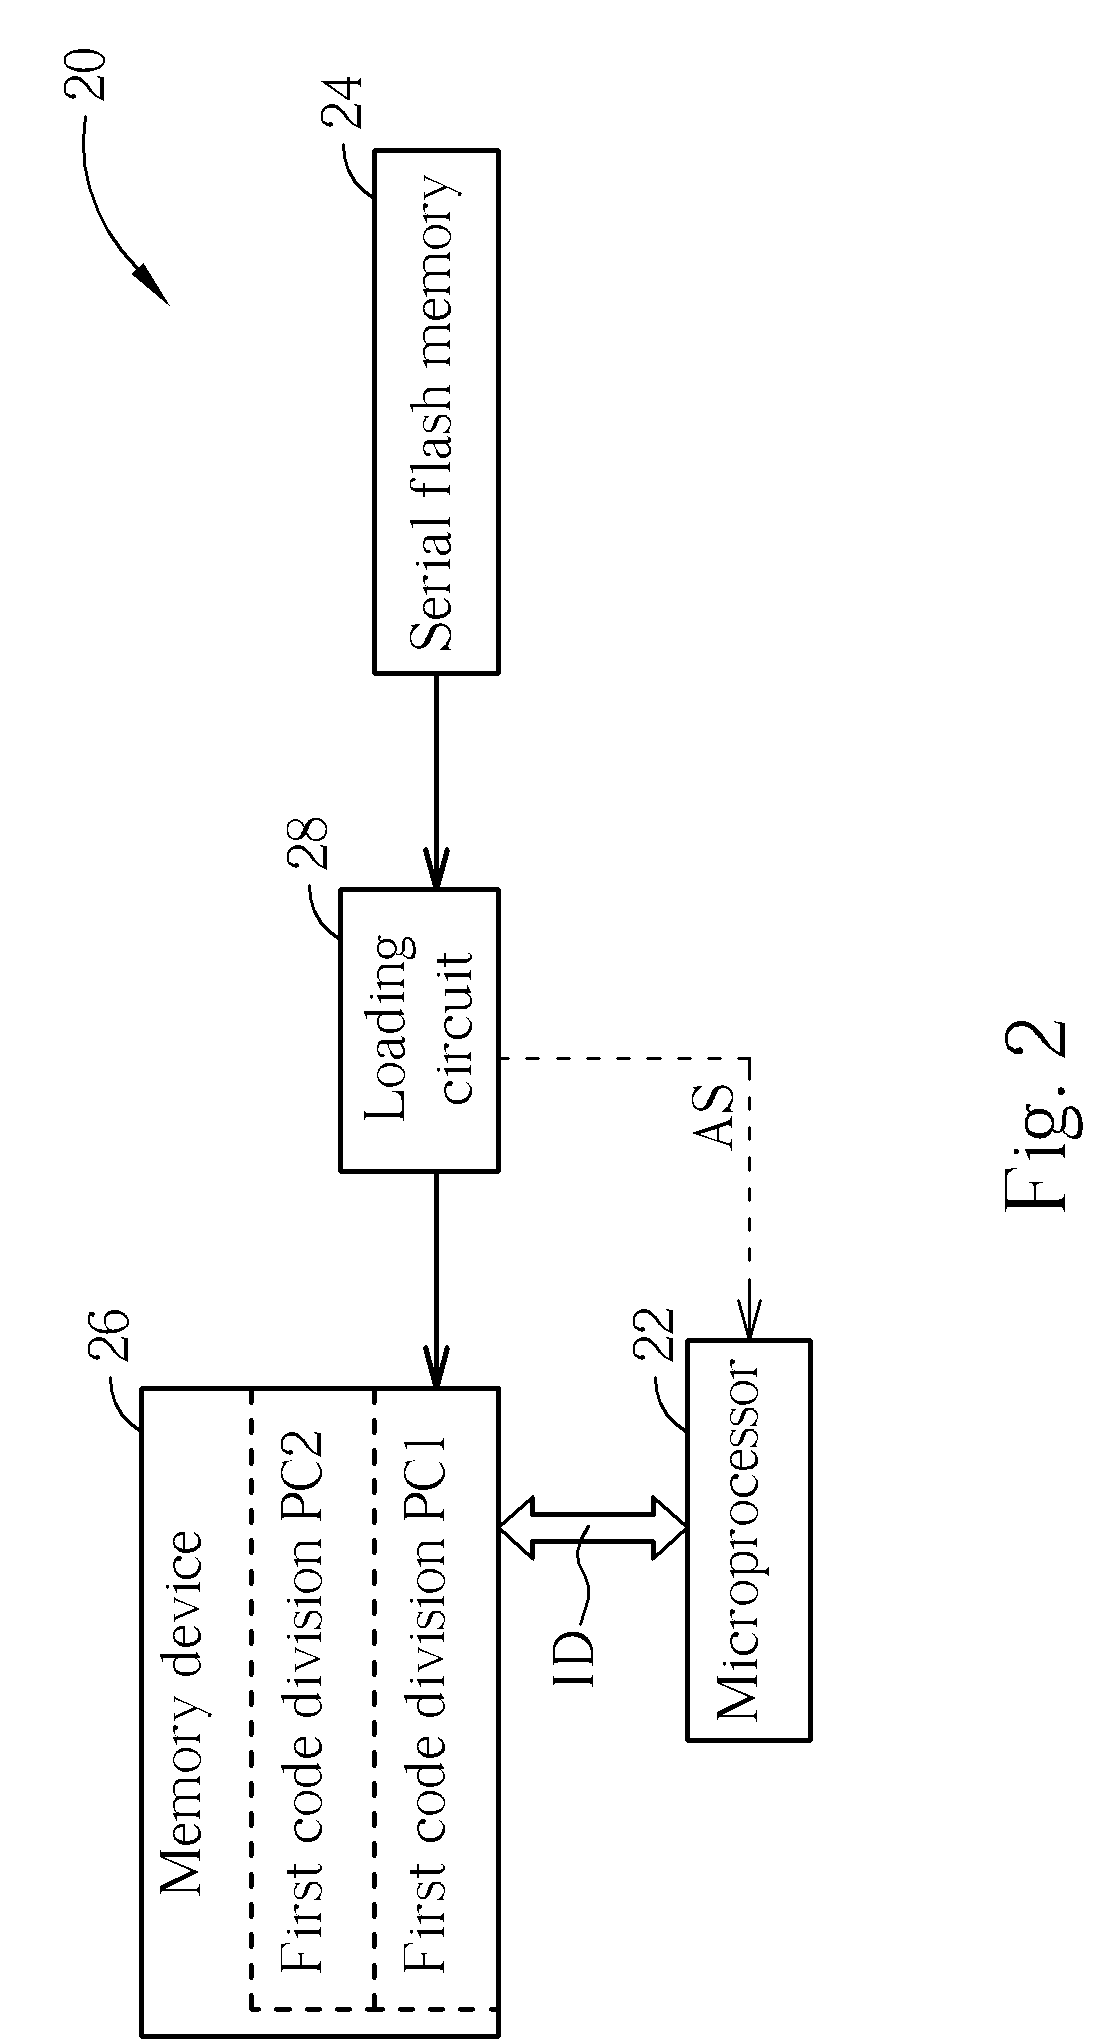 Memory management method for simultaneously loading and executing program codes